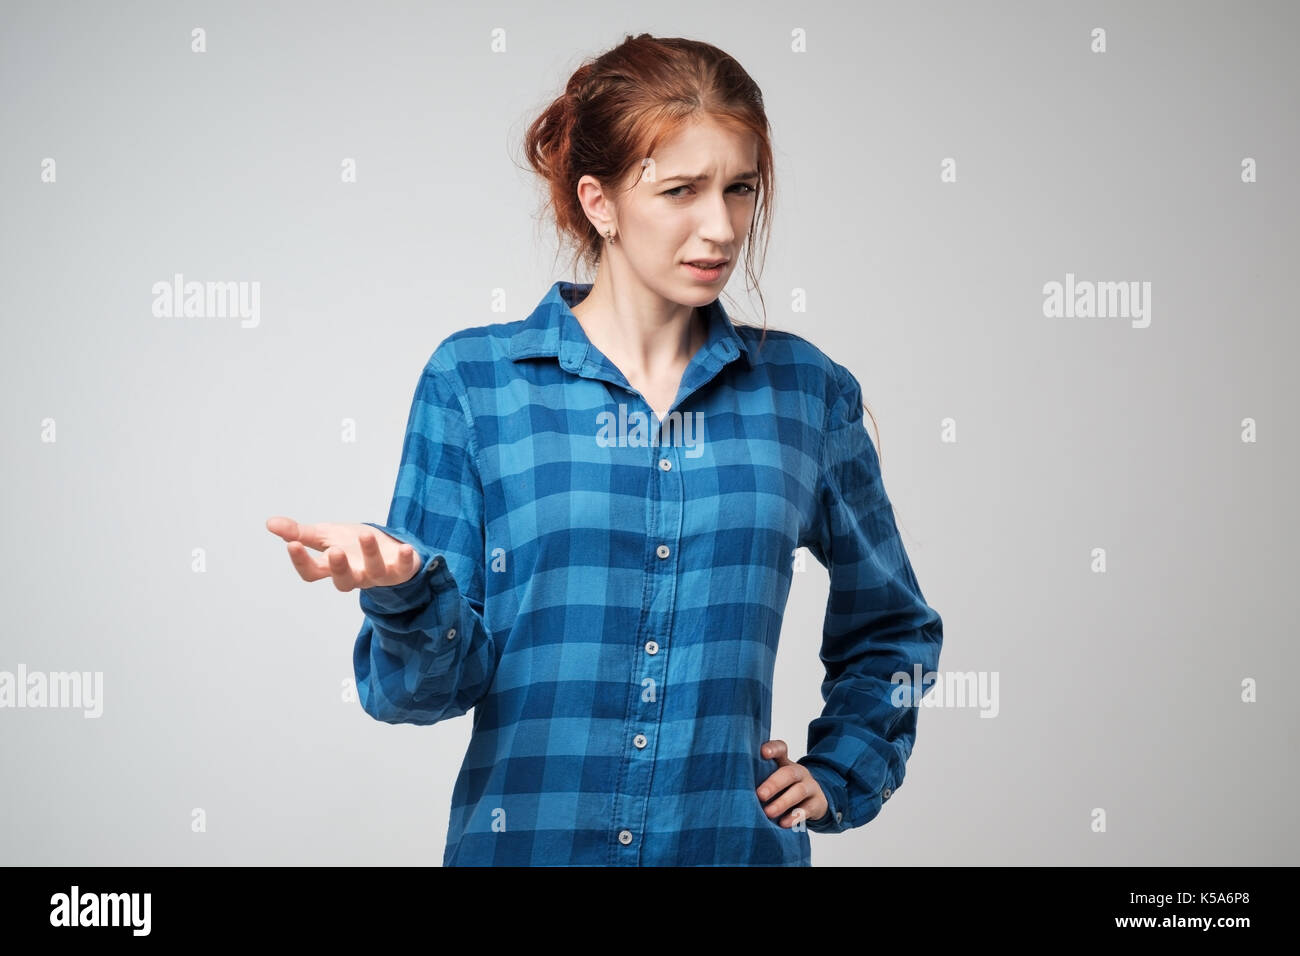 Portrait young angry woman in blue t-shirt. She is unhappy, annoyed by something. Stock Photo